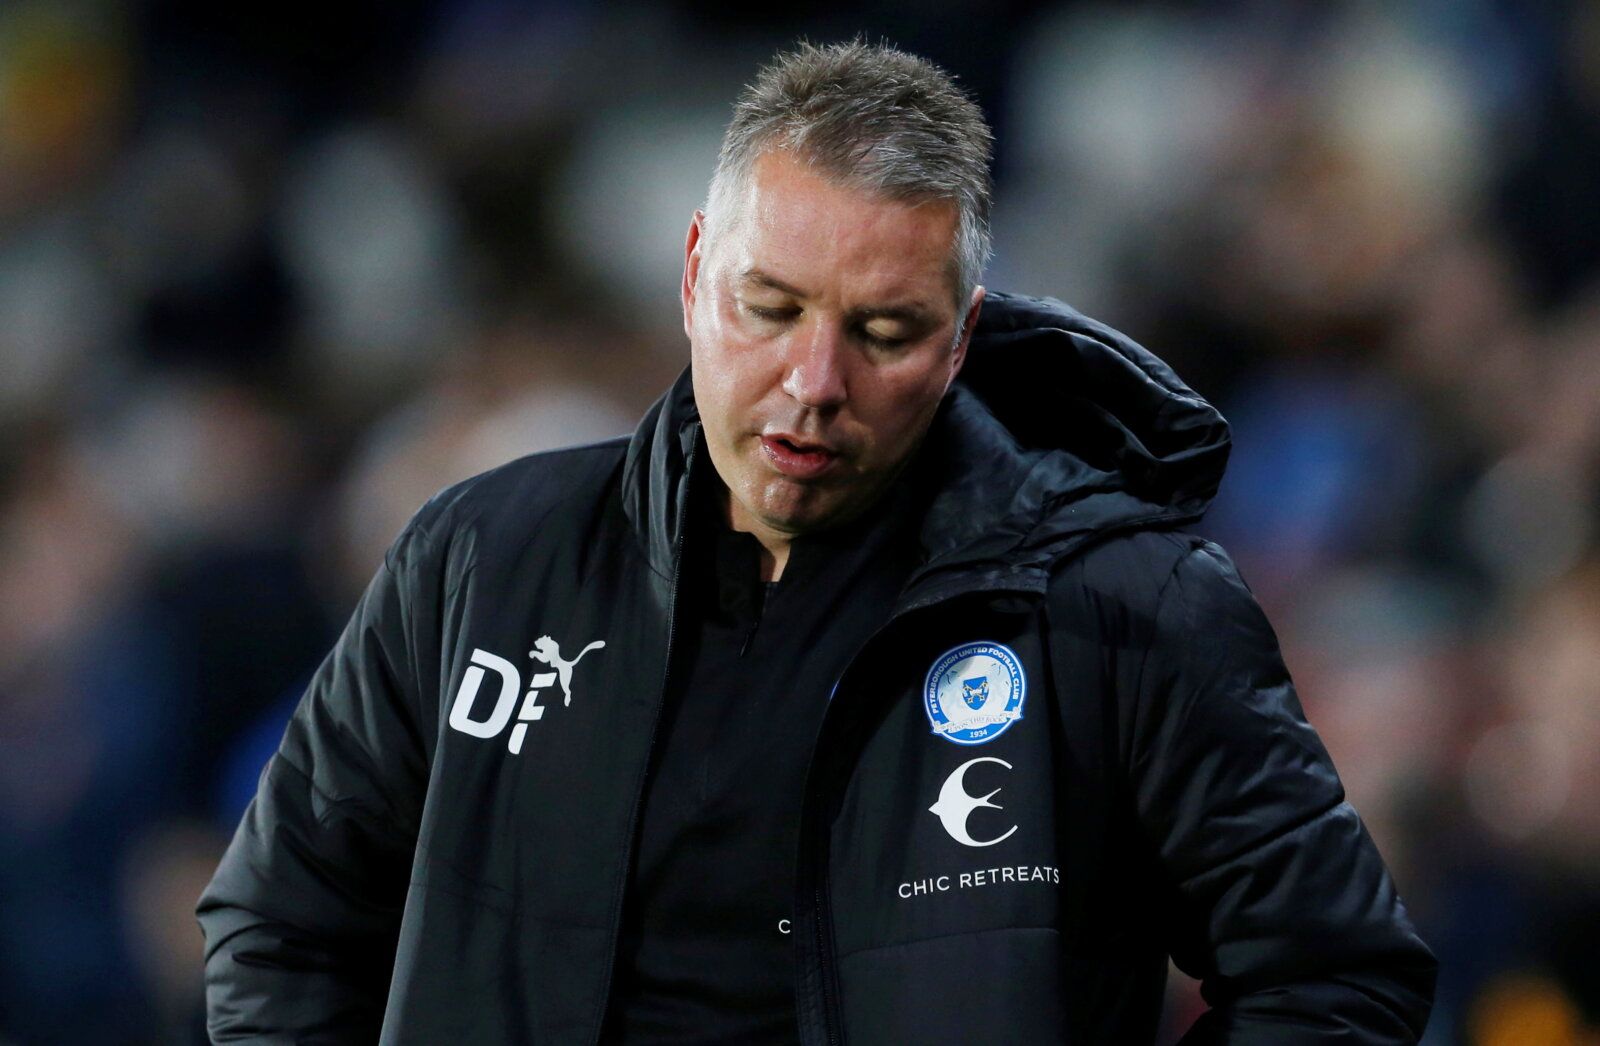 Soccer Football - Championship - Hull City v Peterborough United - KCOM Stadium, Hull, Britain - October 20, 2021  Peterborough United manager Darren Ferguson  Action Images/Craig Brough  EDITORIAL USE ONLY. No use with unauthorized audio, video, data, fixture lists, club/league logos or 